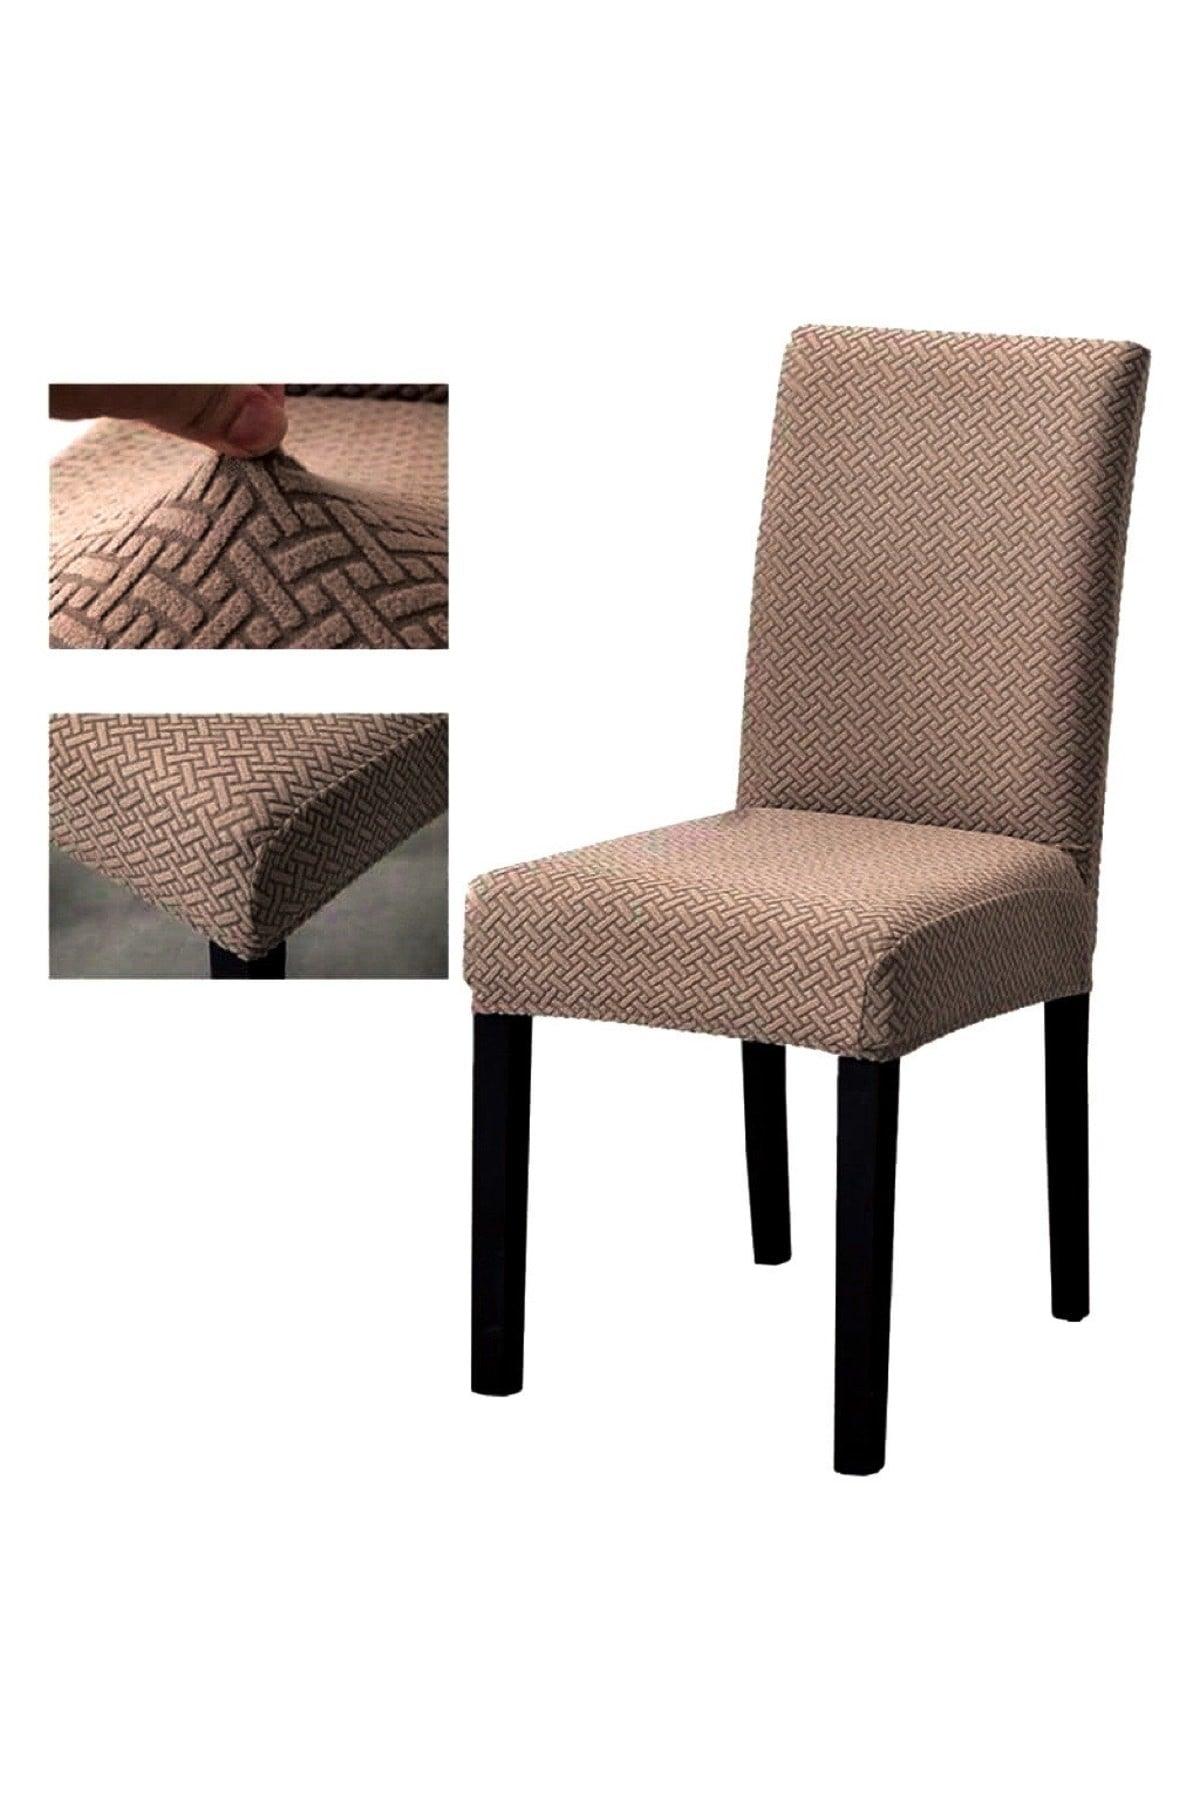 High Quality Chair Cover, Lycra, Washable 1 Piece Brown Color - Swordslife